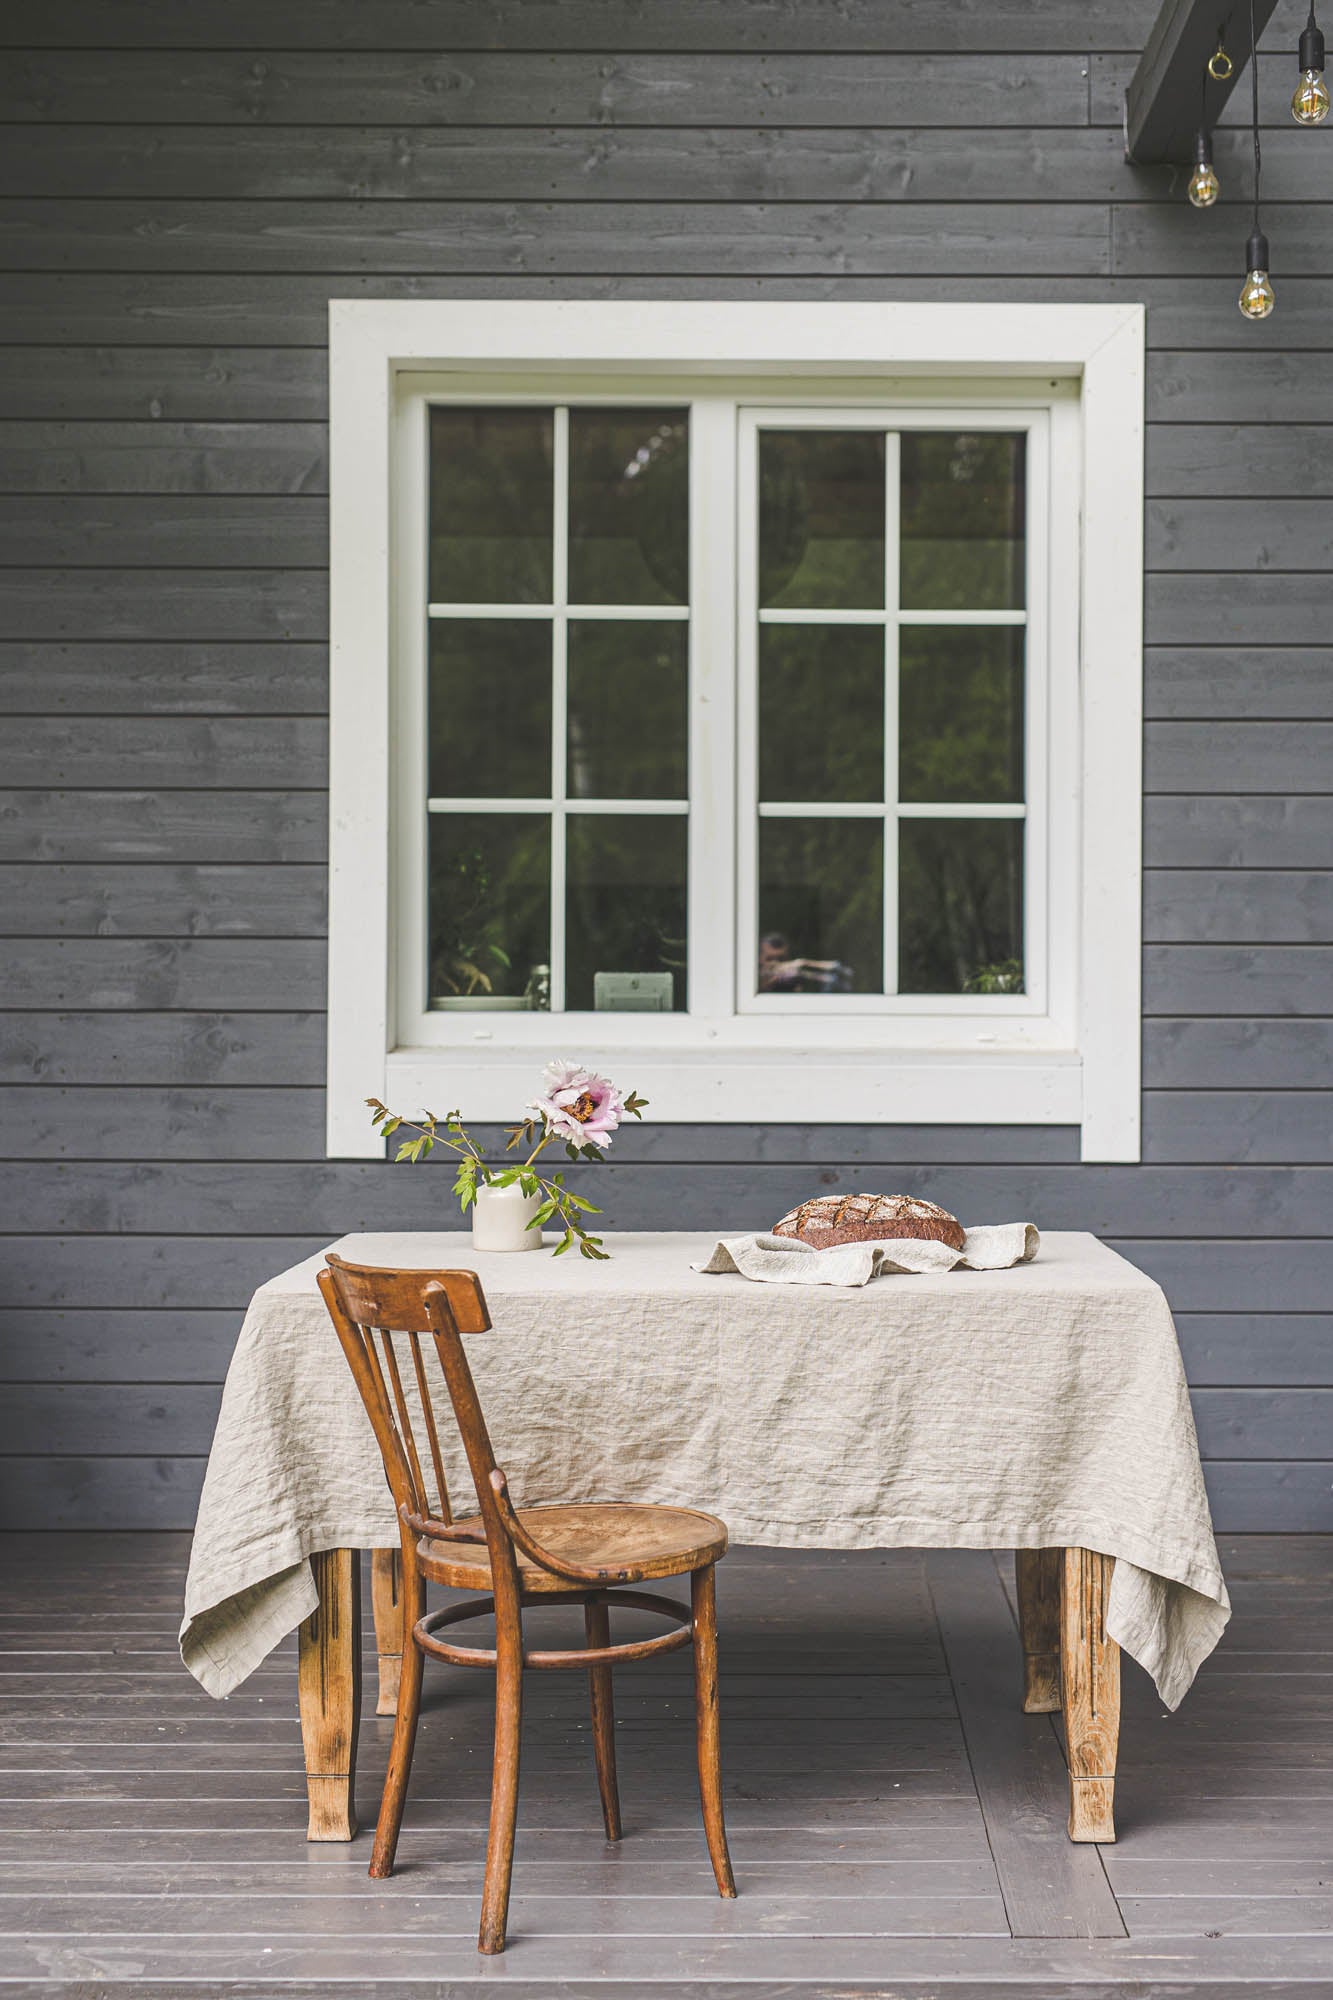 Natural linen tablecloth with mitered corners